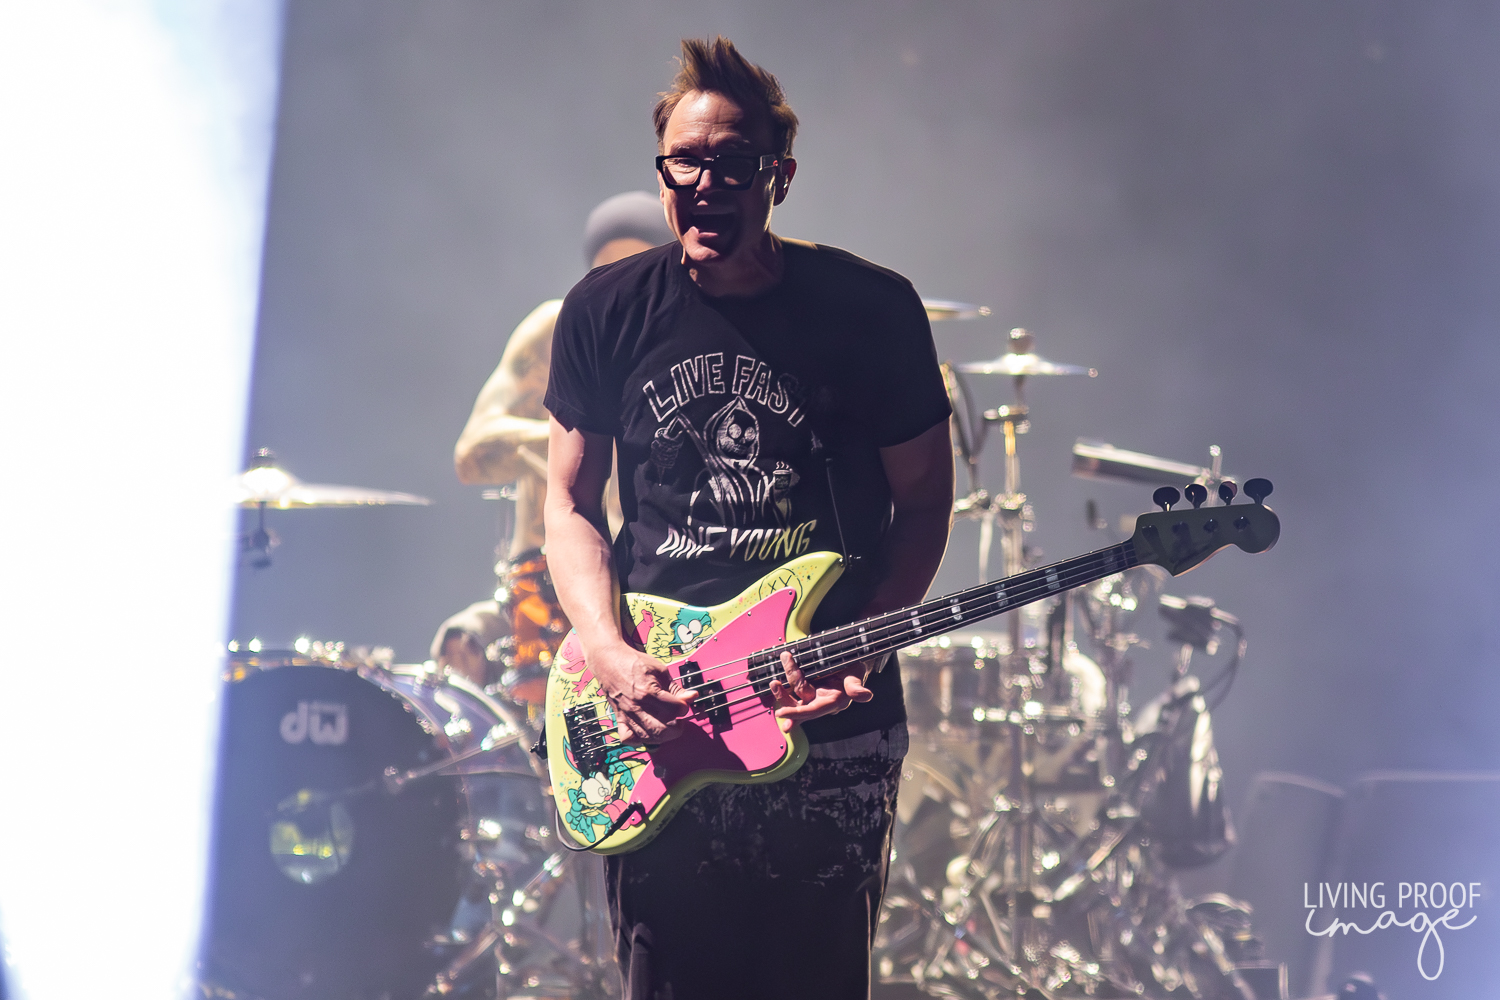 Blink-182 @ American Airlines Center, Dallas, TX - MTC MAG